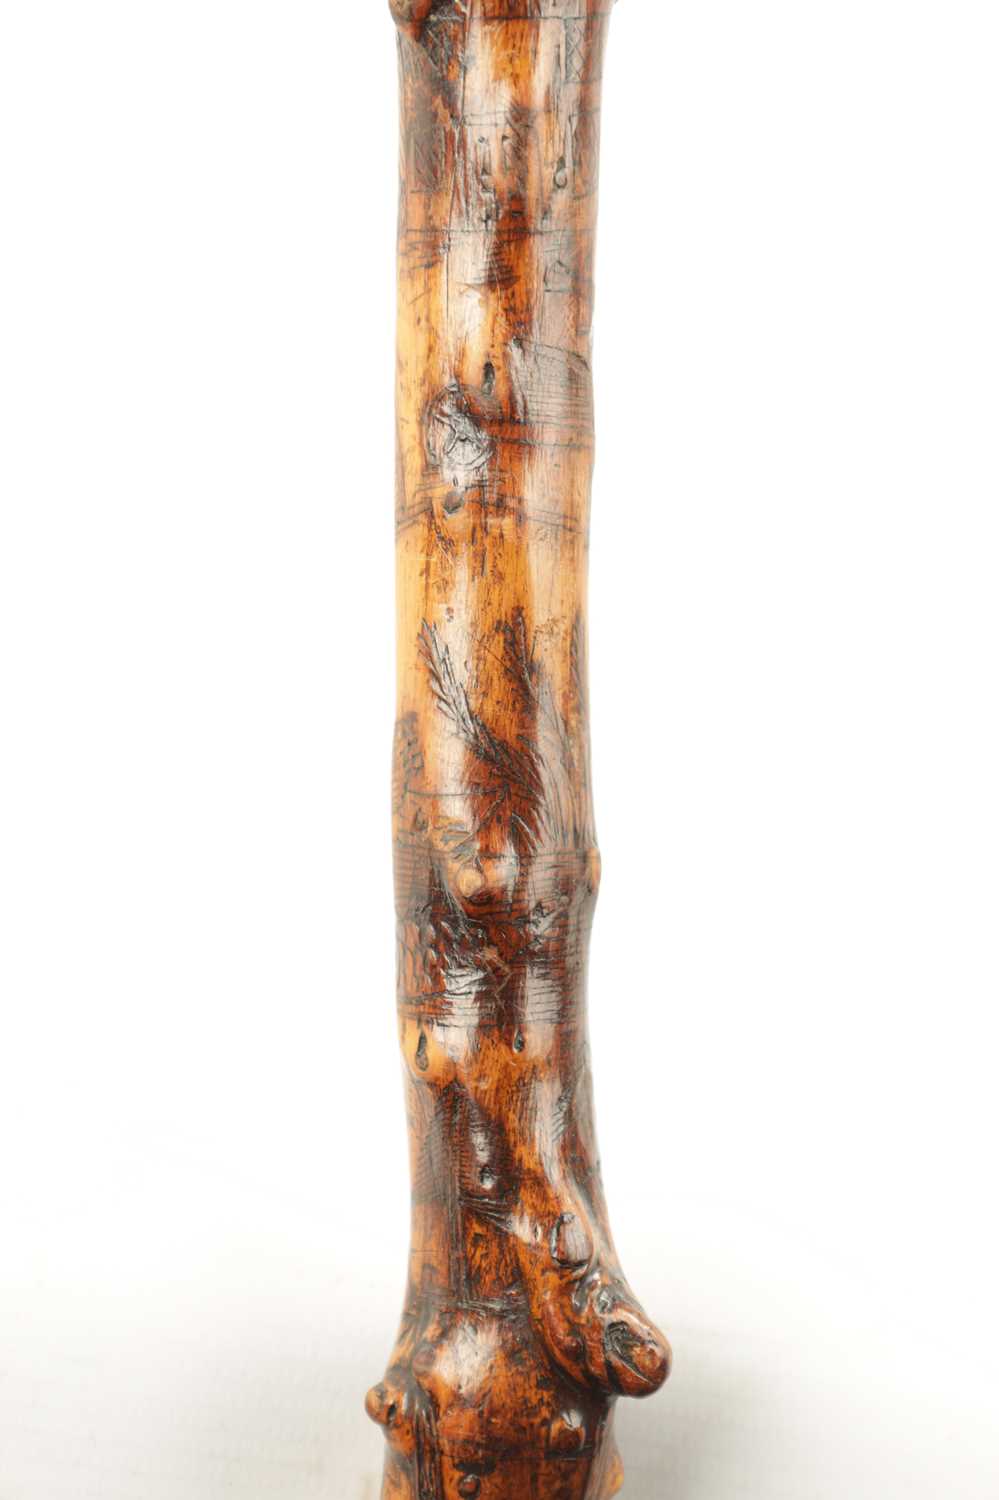 A RARE VICTORIAN FOLK ART CARVED HAWTHORN WALKING STICK DATED 1860 - Image 4 of 7